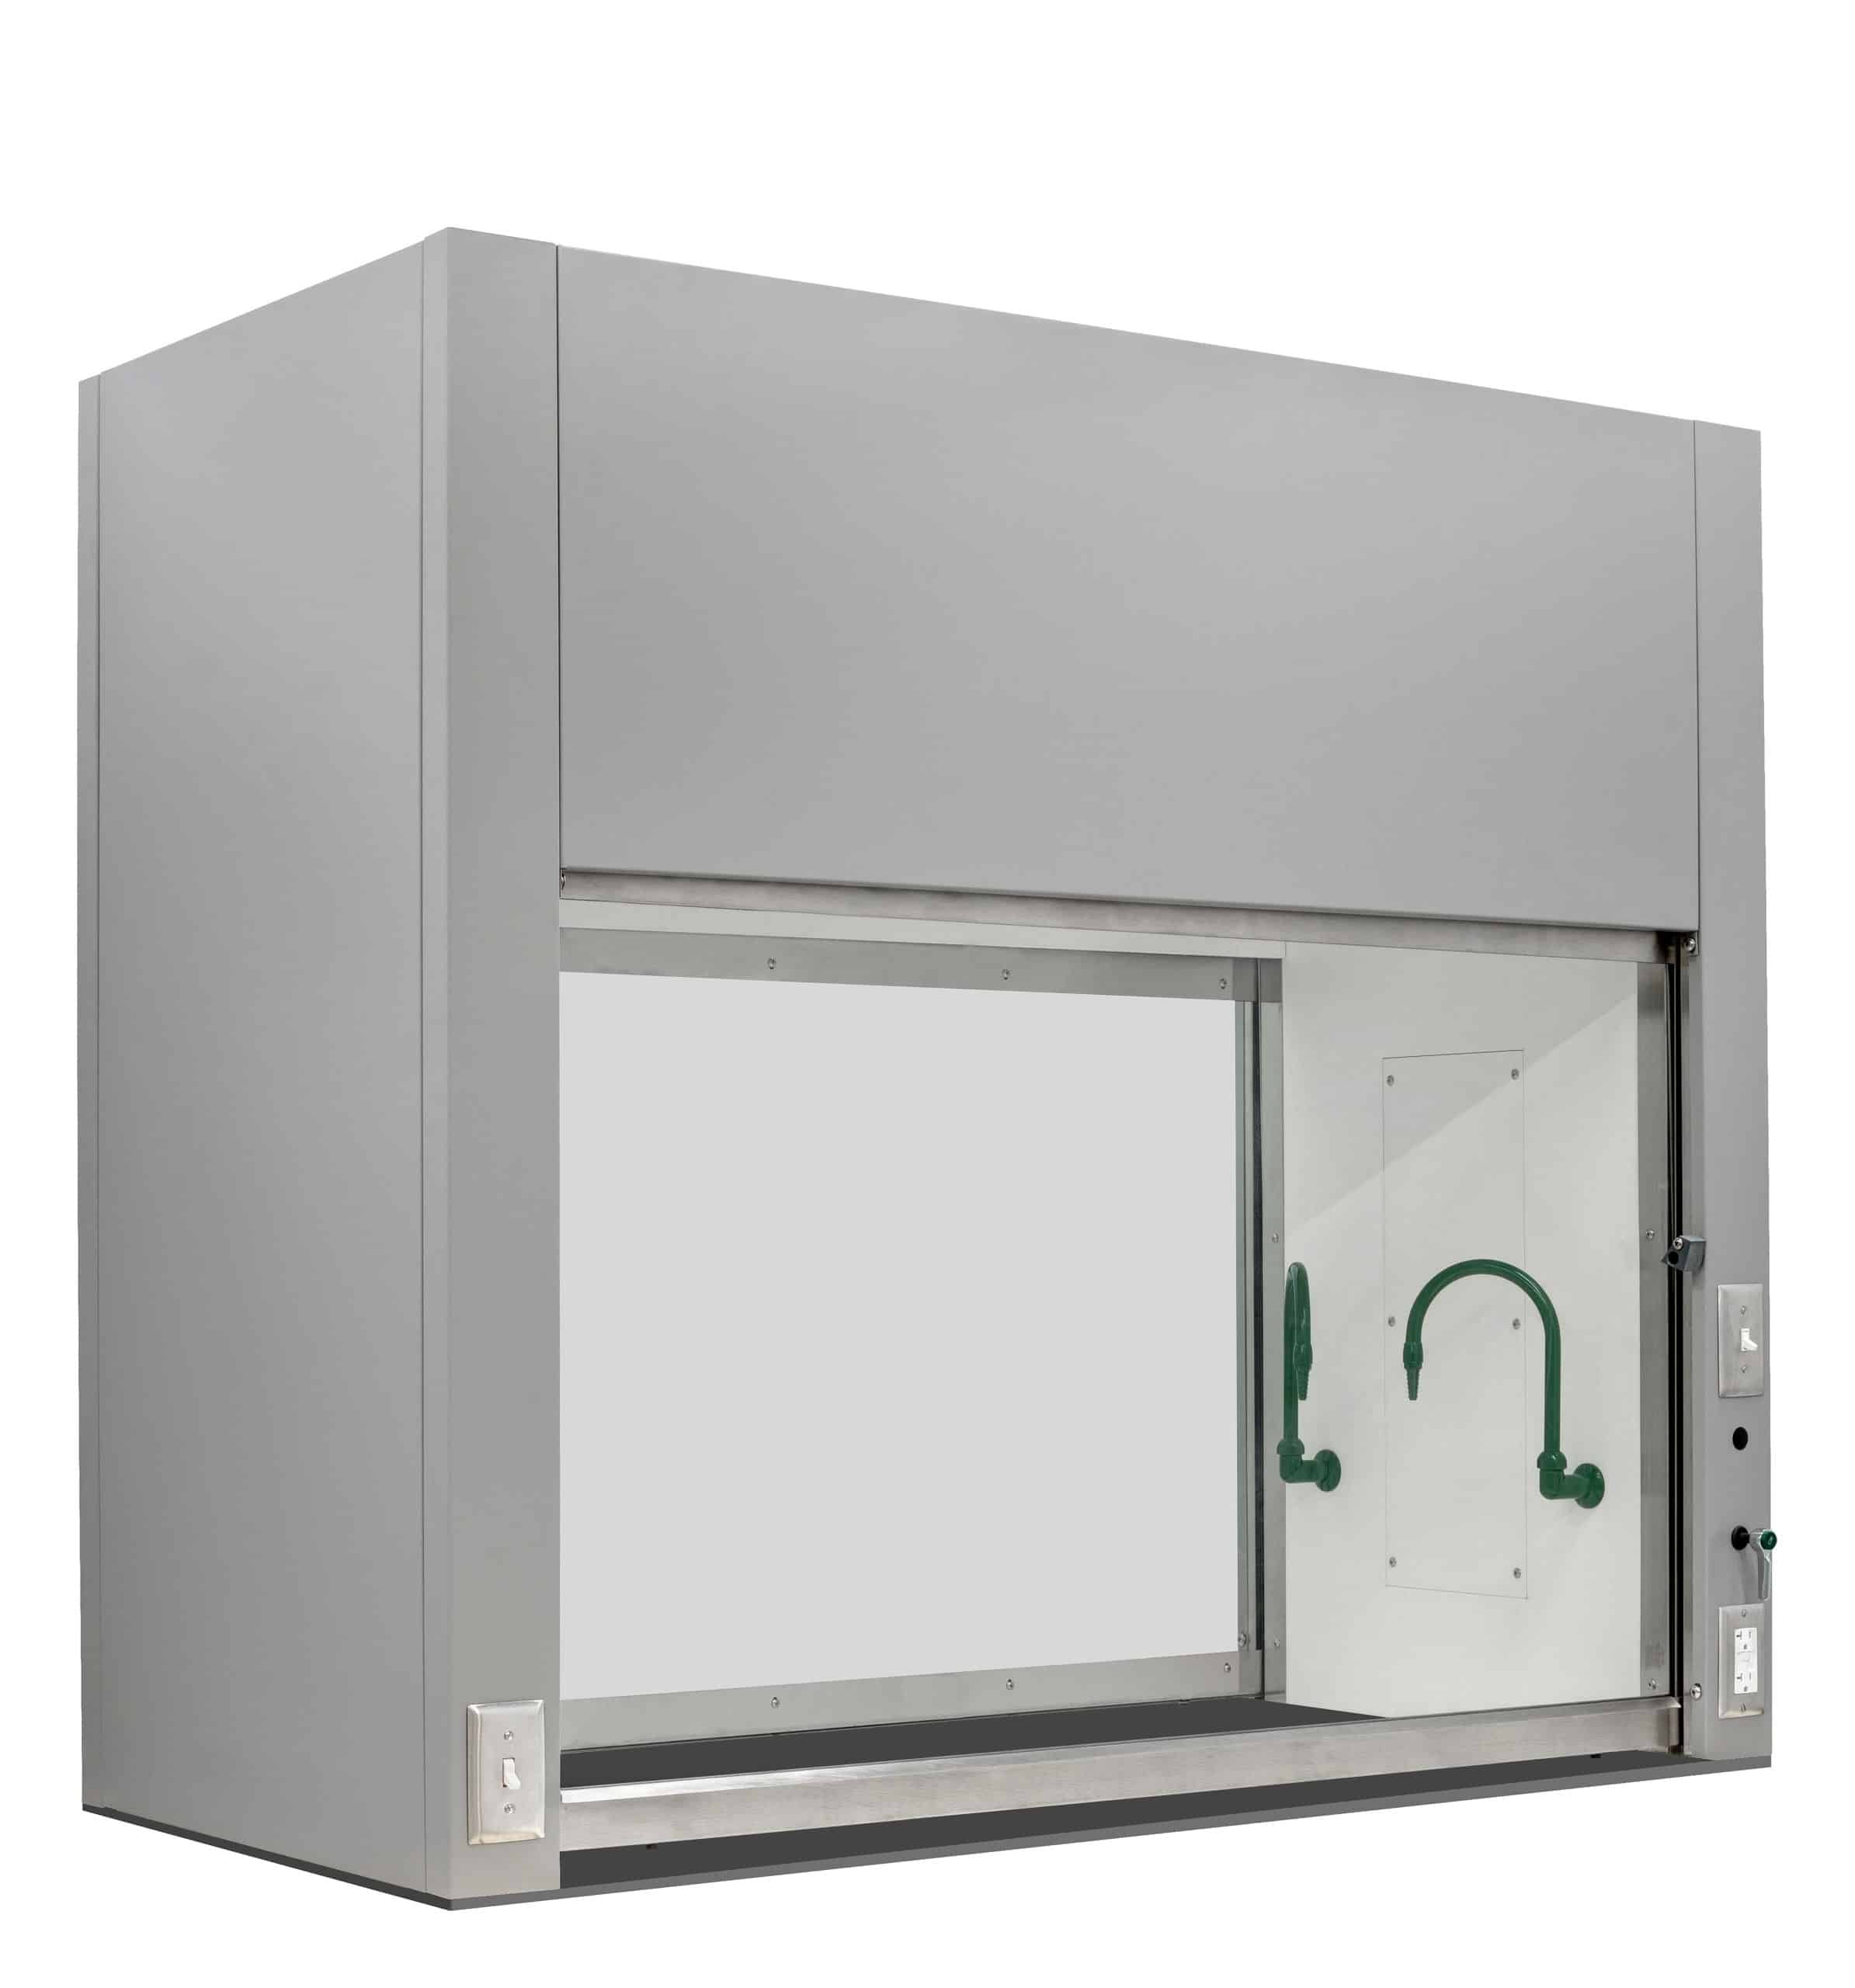 Double-Sided Teaching Fume Hoods for Sale